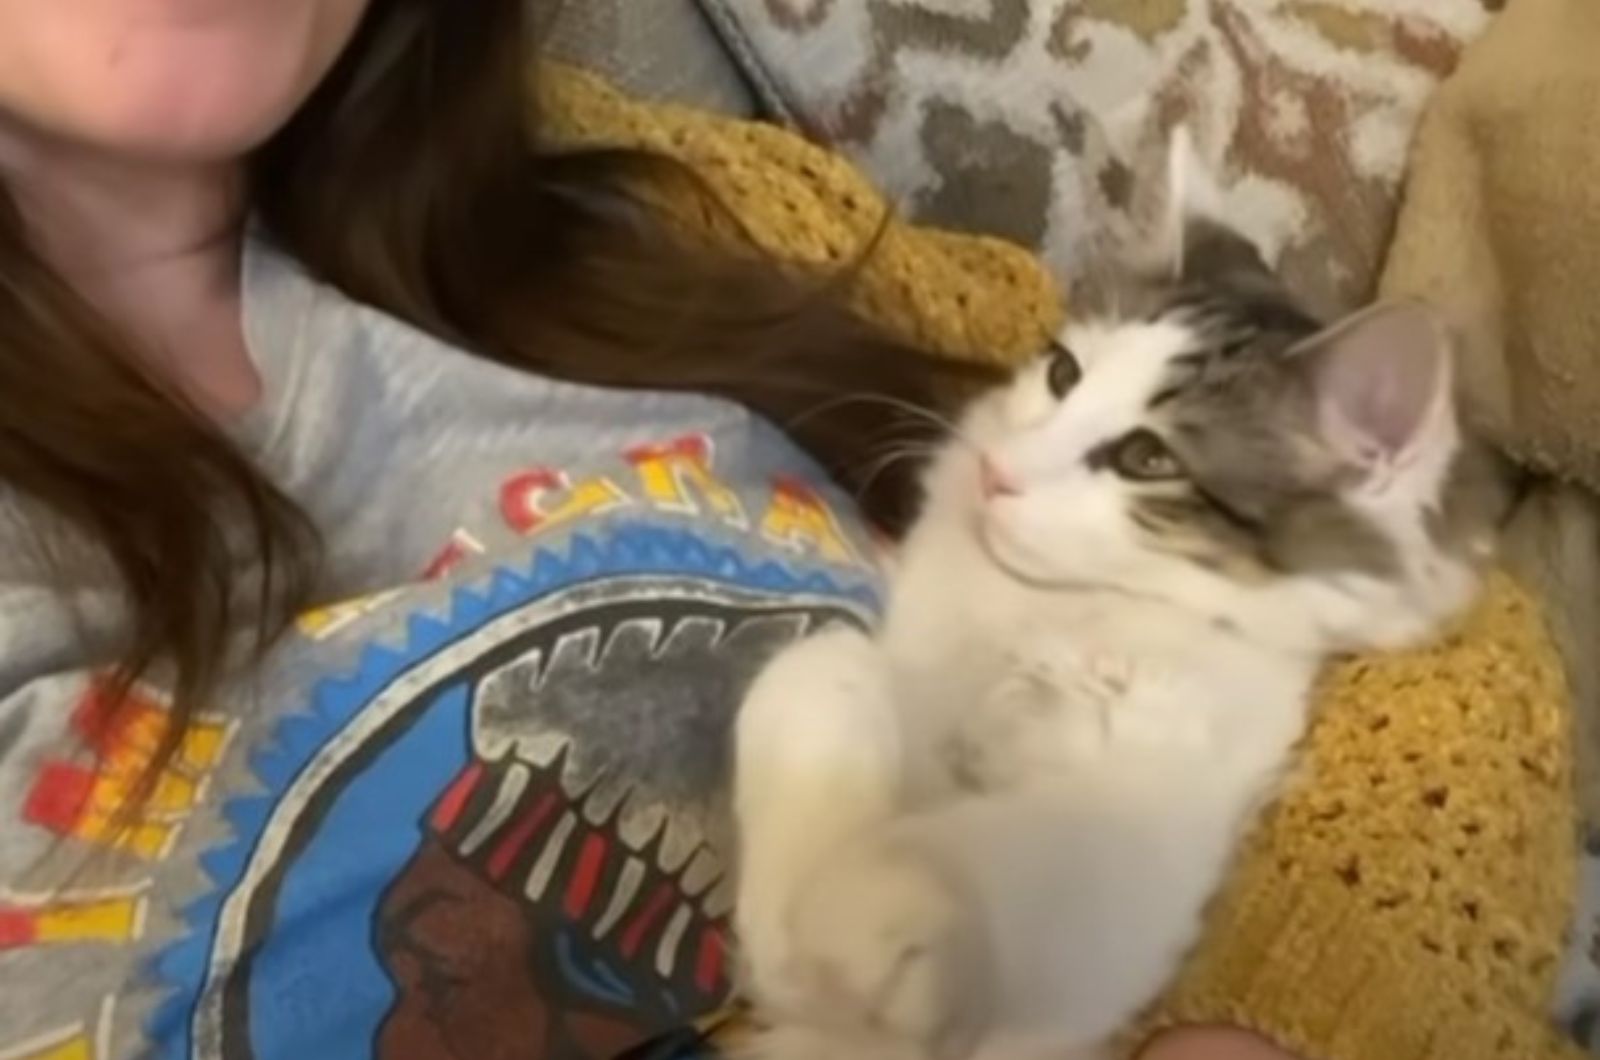 cat lying next to a woman